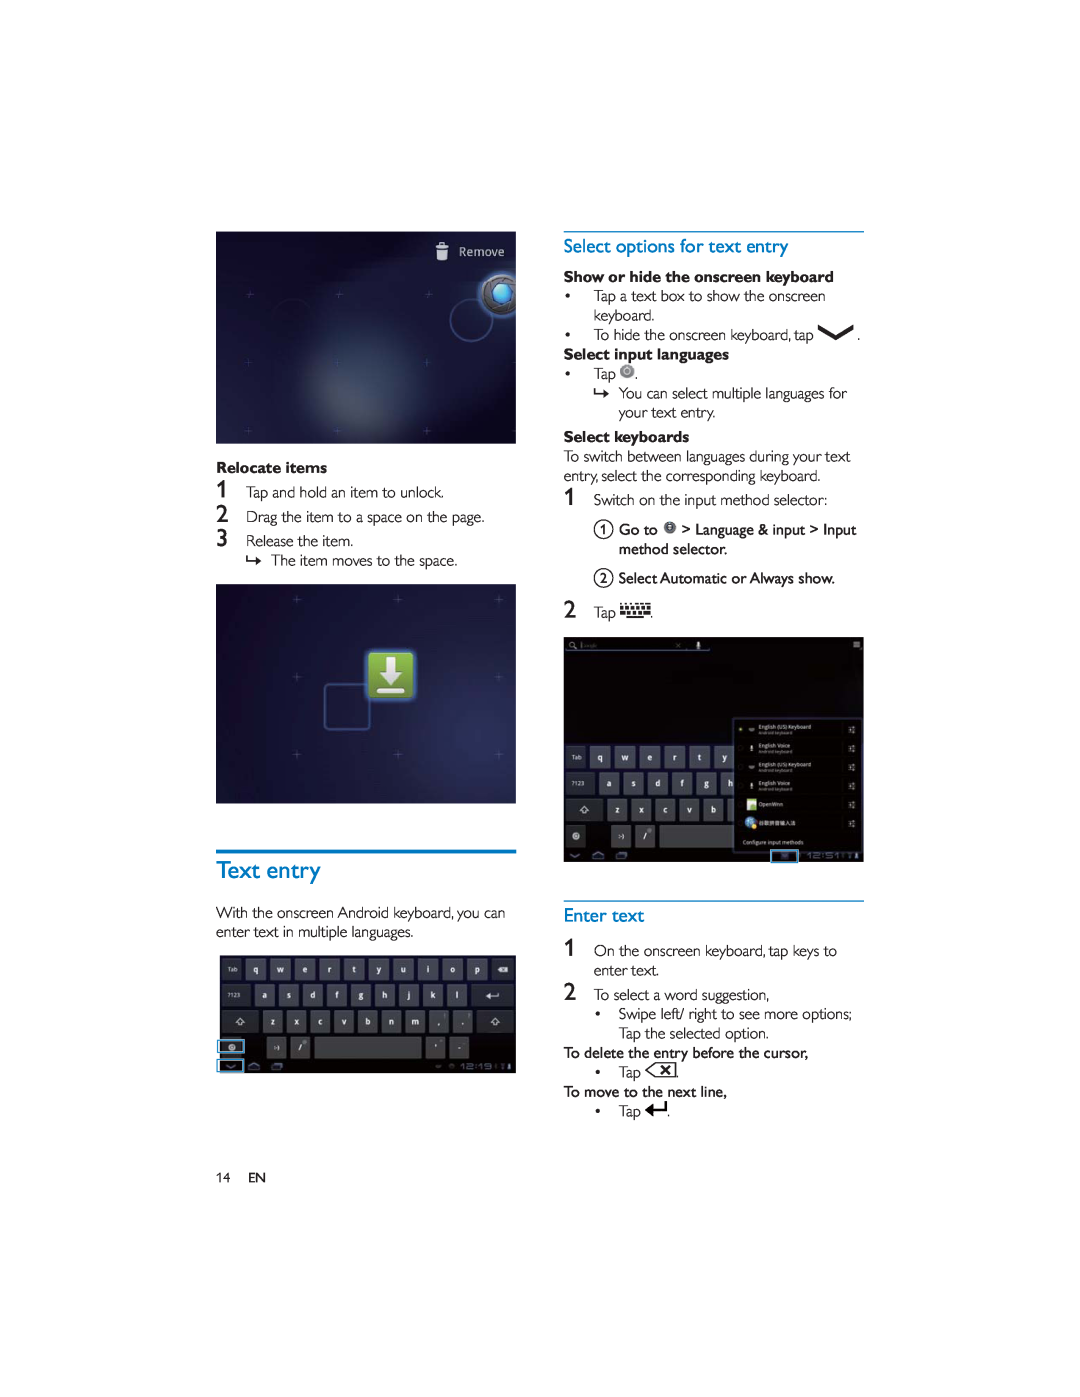 Philips PI7000/93 user manual Text entry, Select options for text entry, Enter text, Relocate items, Select input languages 